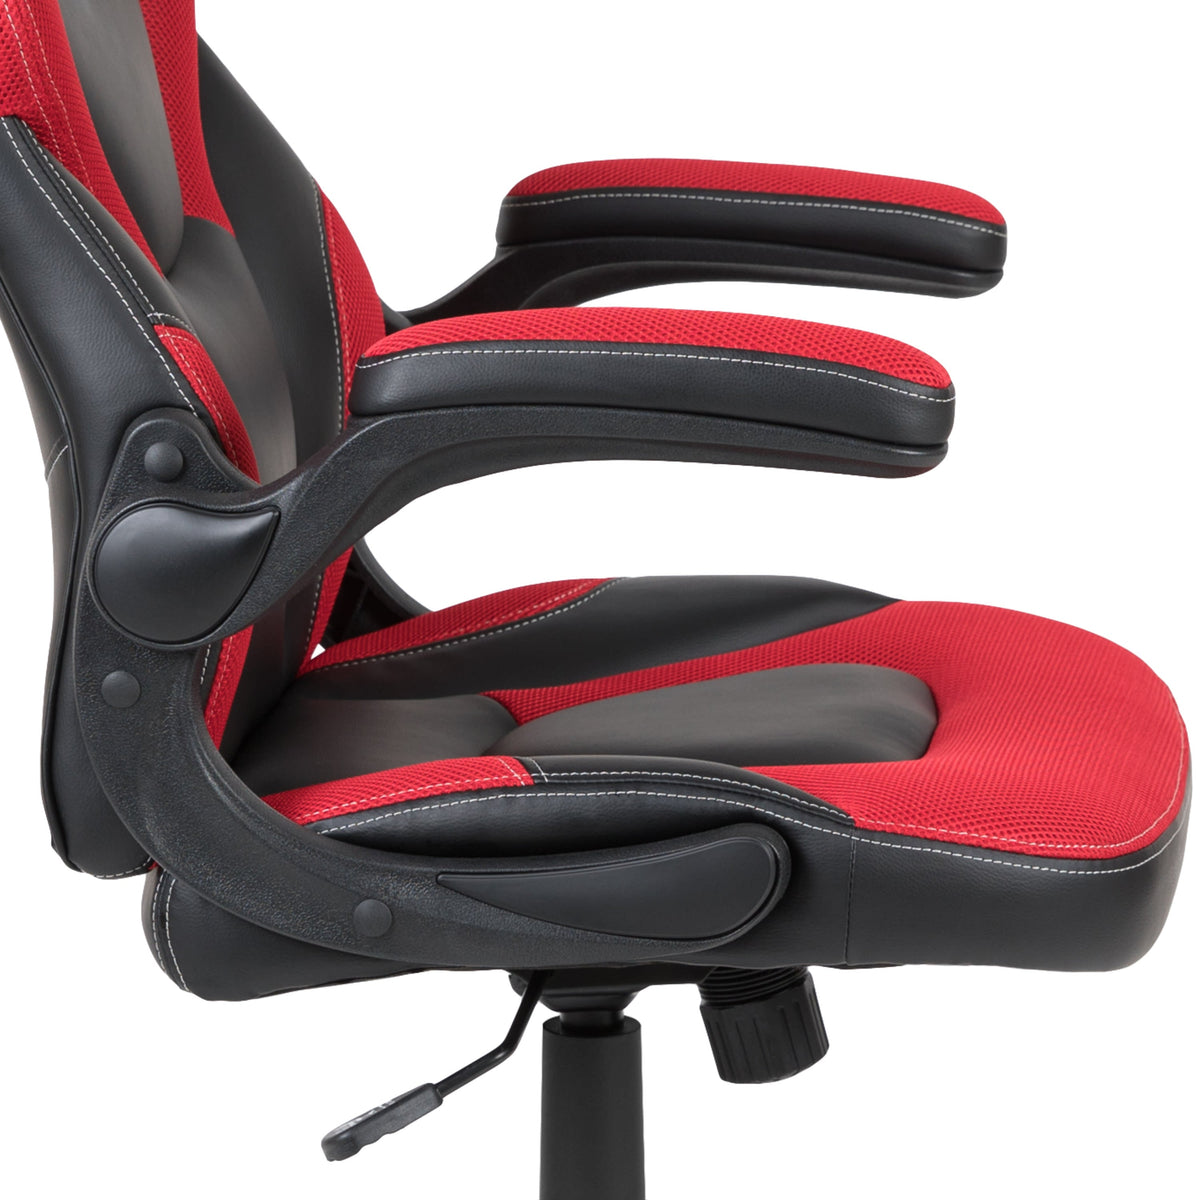 Red |#| Desk Bundle - Red Gaming Desk, Cup Holder, Headphone Hook and Red/Black Chair